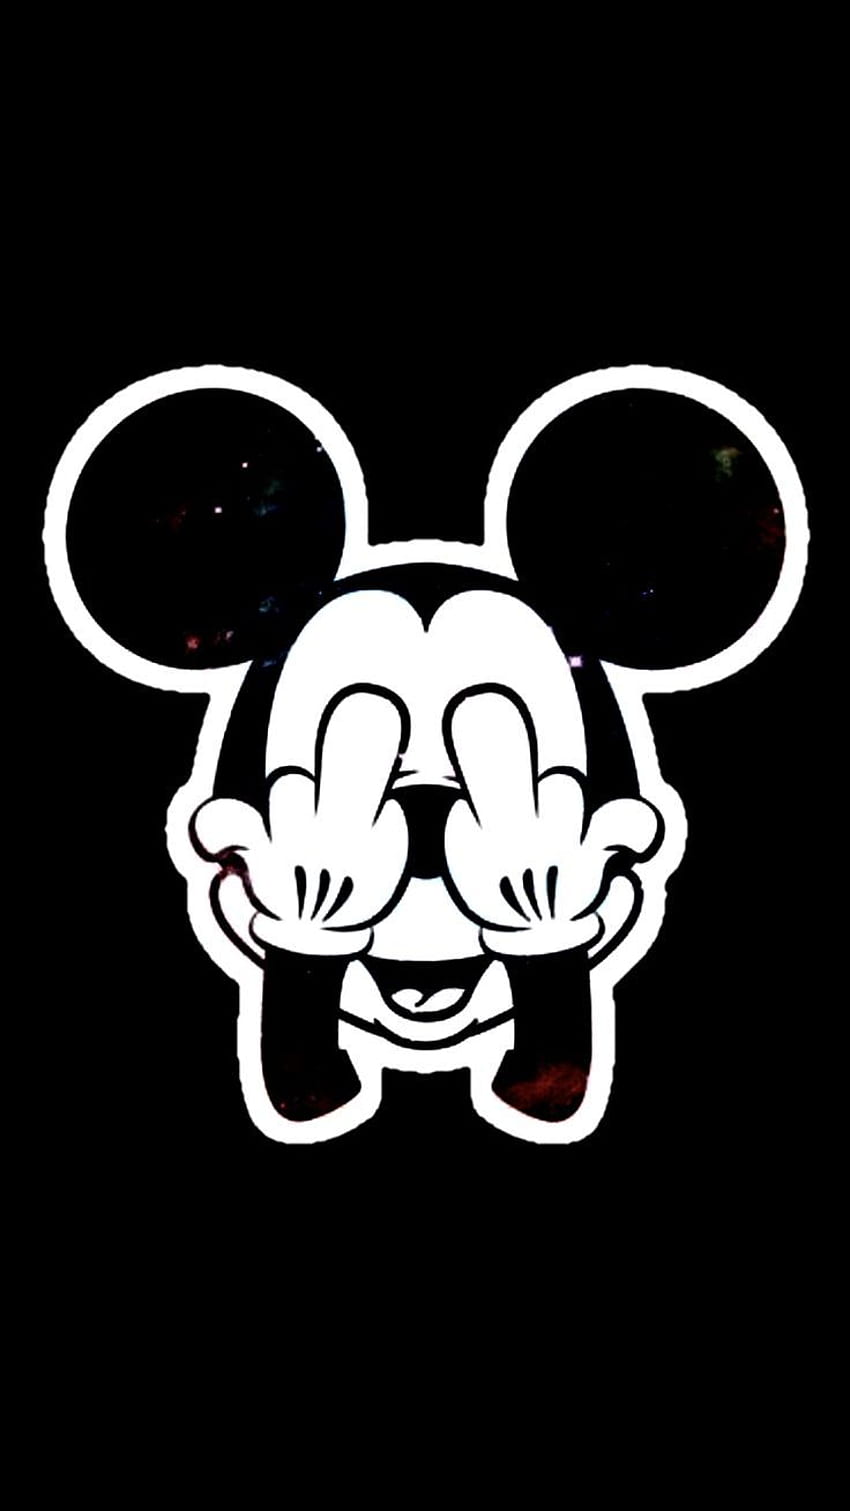 Planodefundo. Mickey Mouse Kunst, IPhone Hintergrund Disney, Disney Bildschirmhintergrund, Mickey Mouse Swag HD phone wallpaper